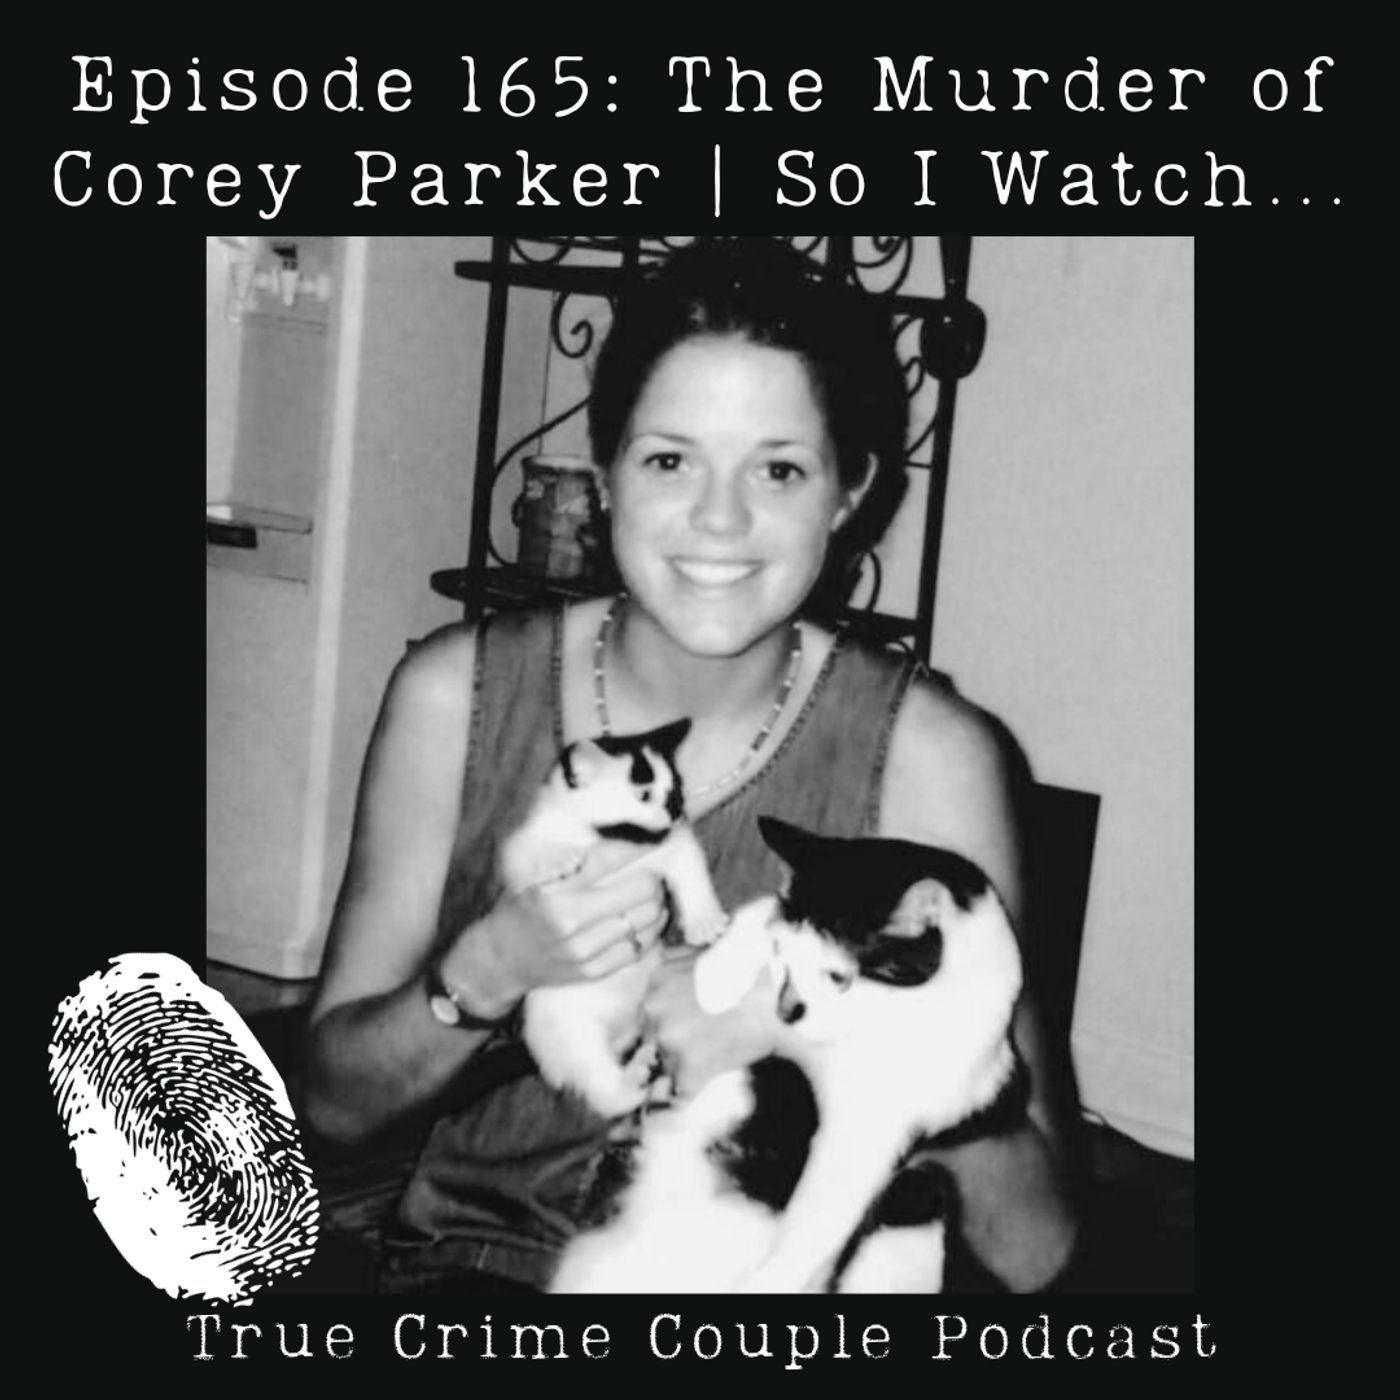 Episode 165: The Murder of Corey Parker | So I Watch...